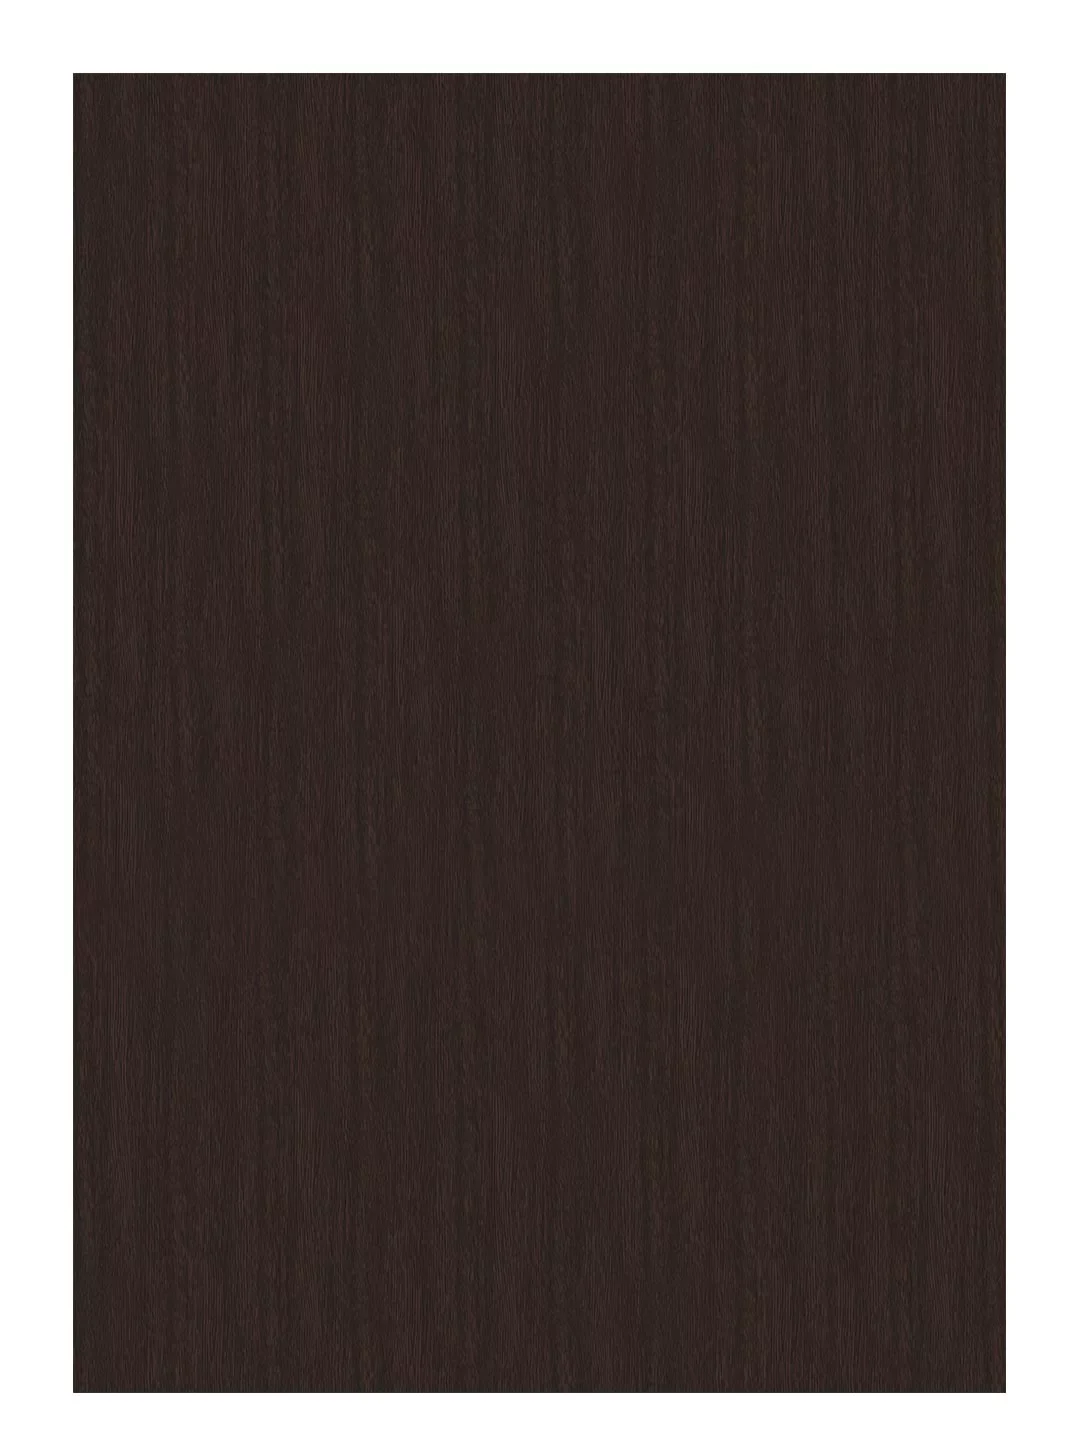 Alutech - Natural Wood | NW-212 - AMERICAN WENGE